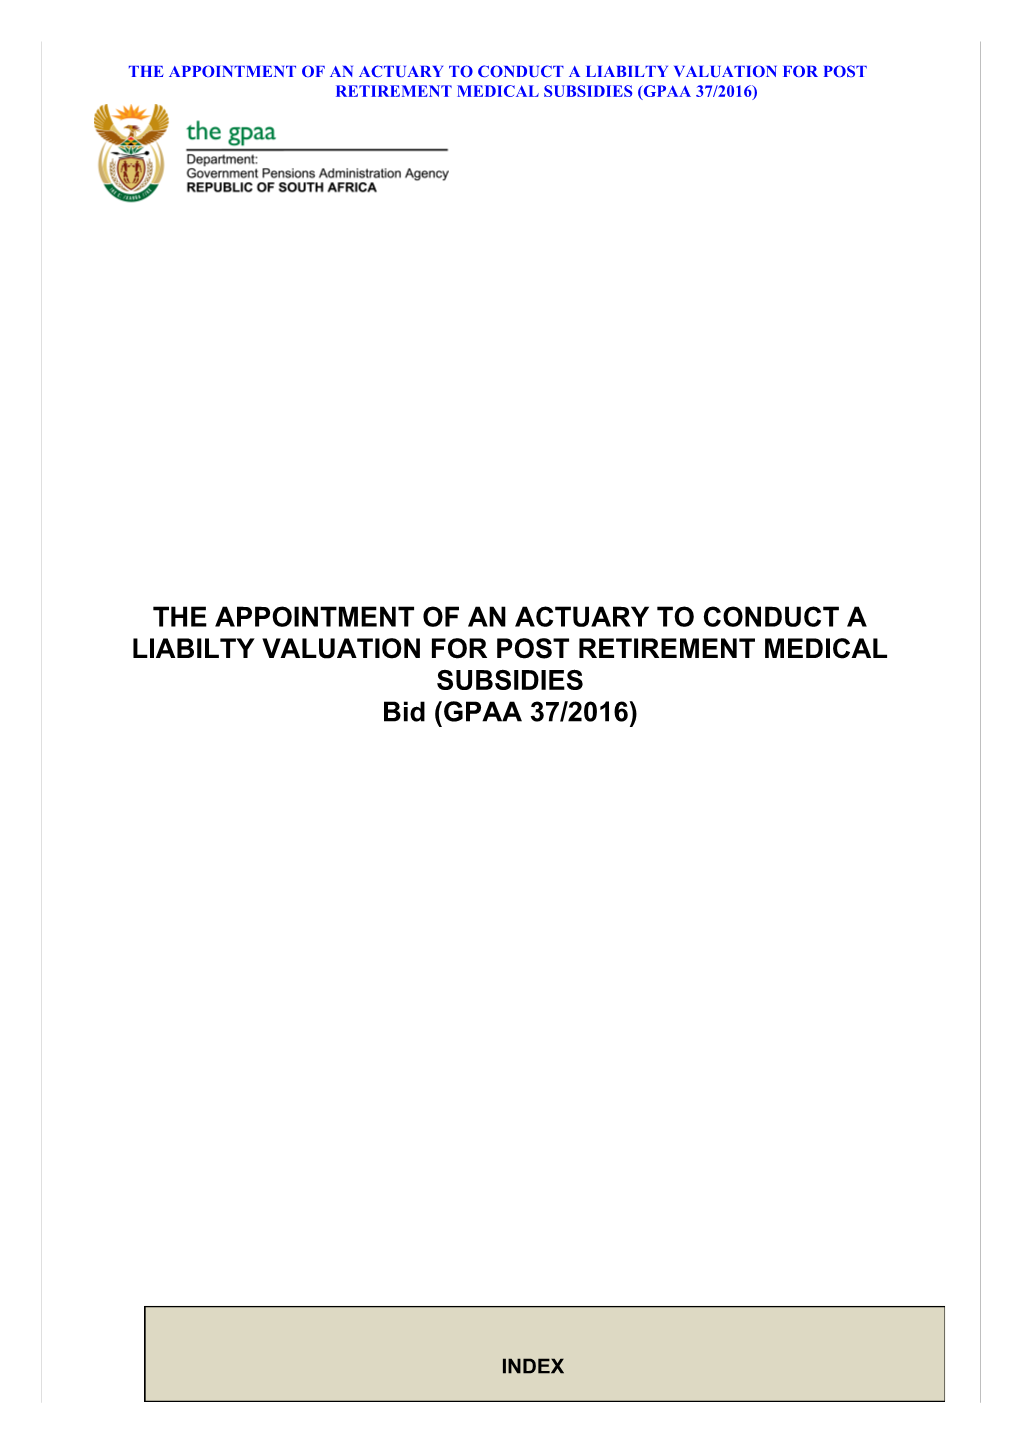 The Appointment of an Actuary to Conduct a Liabilty Valuation for Post Retirement Medical